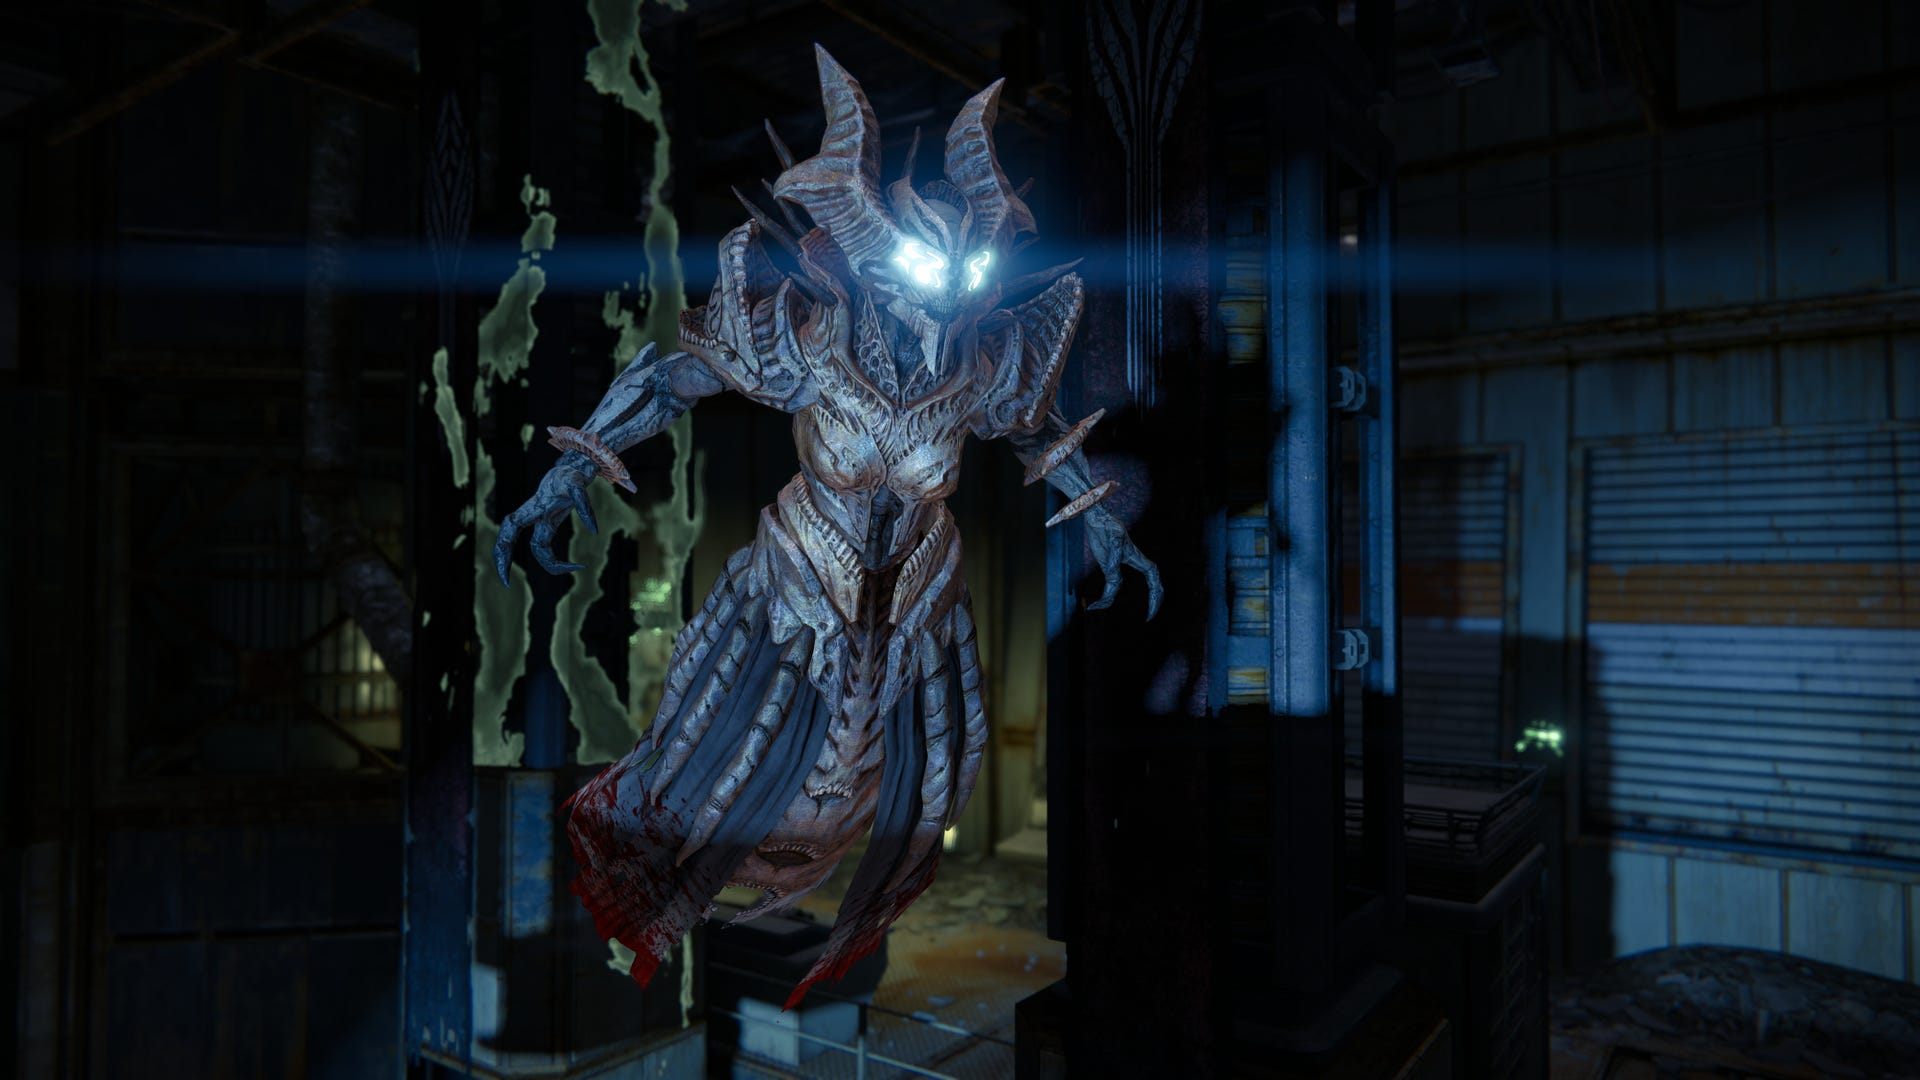 Destiny: The Dark Below & House of Wolves Expansions - The